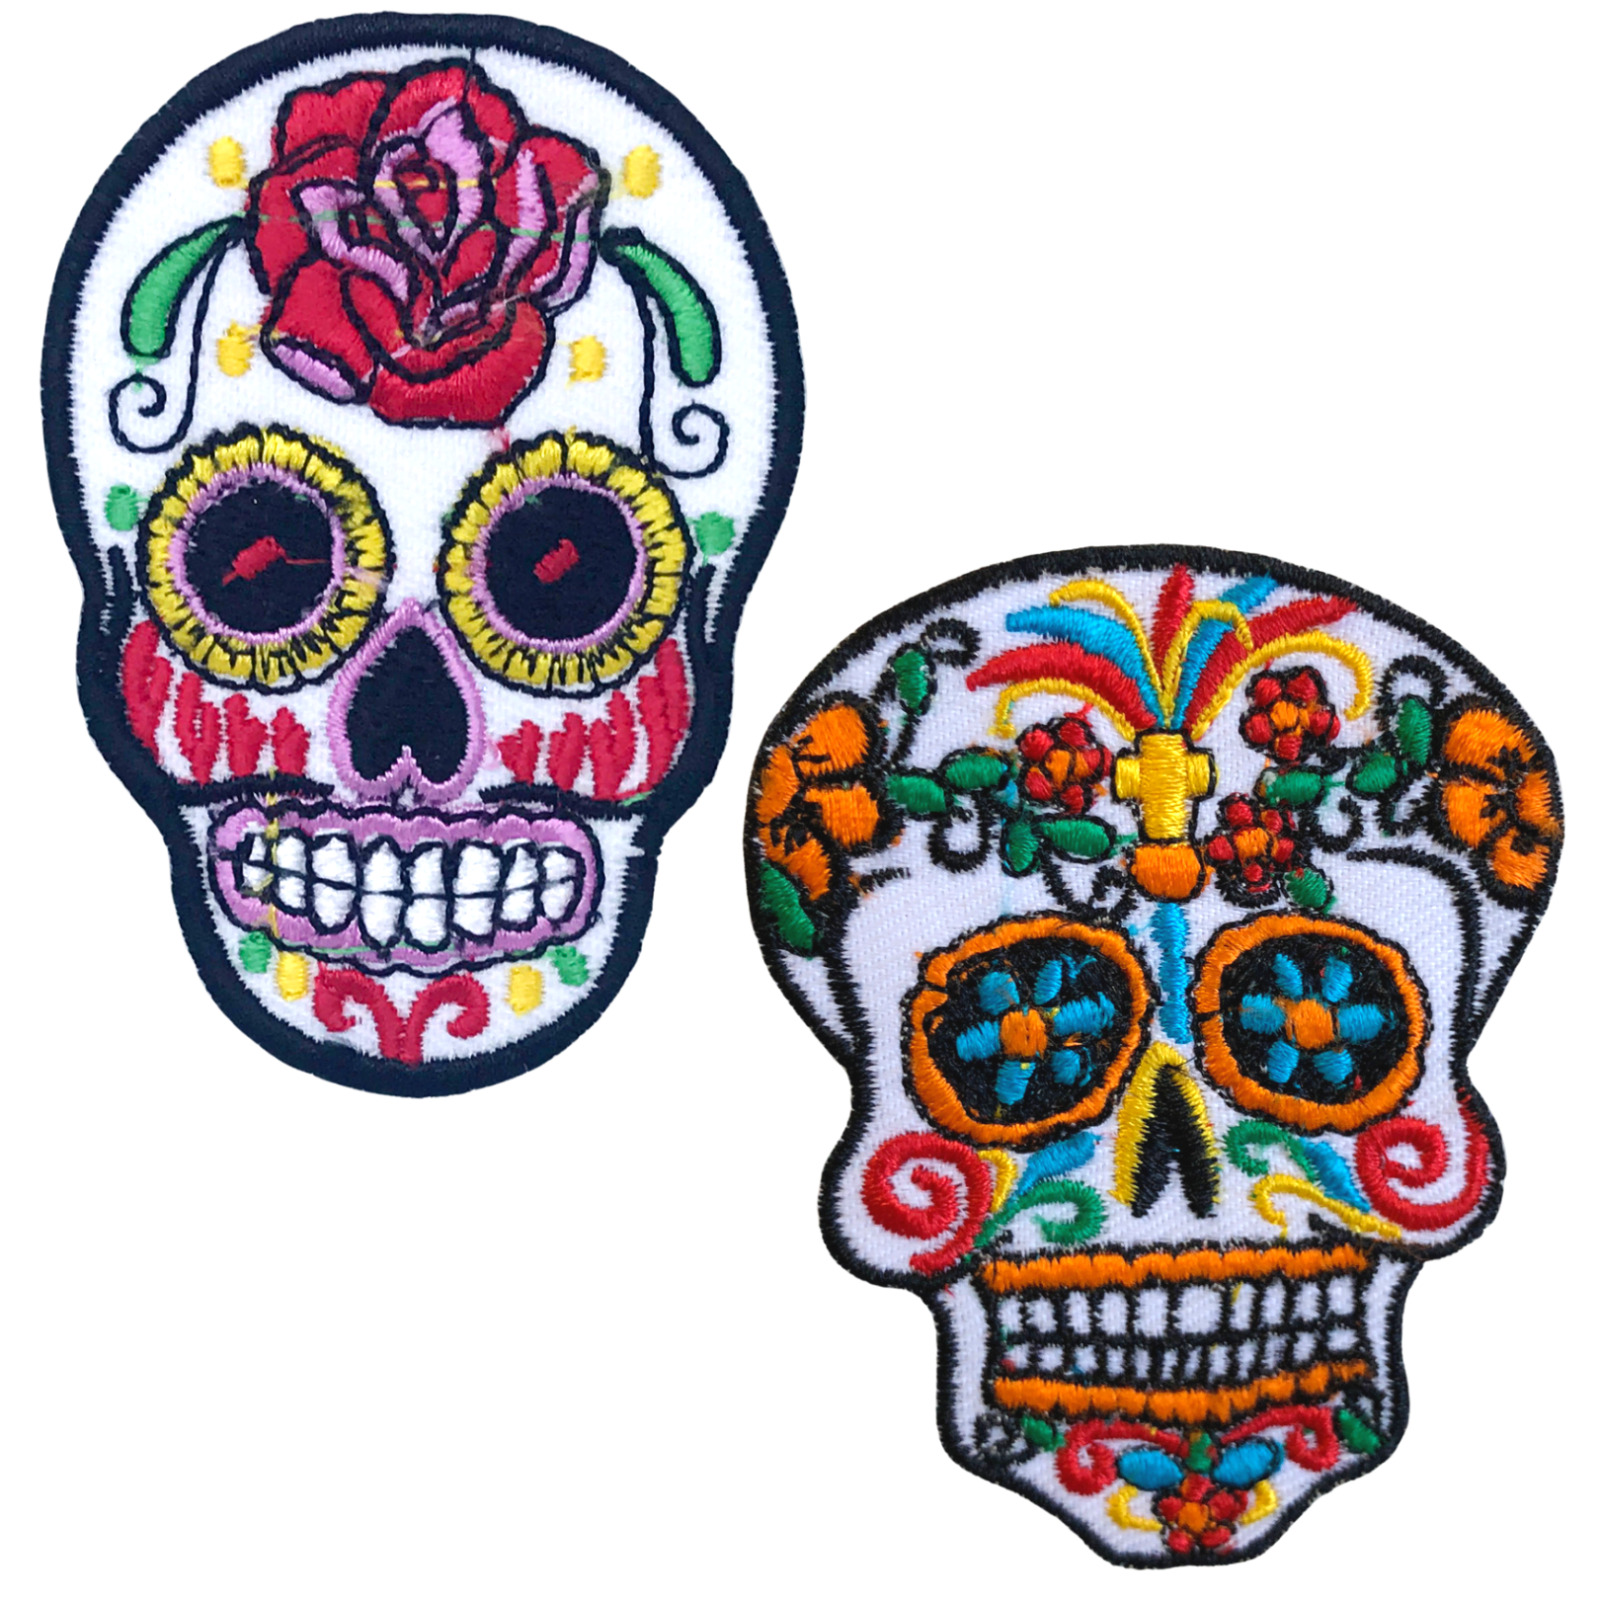 Colourful Skulls Mexican Festival of The Dead art Iron Sew on Embroidered patch